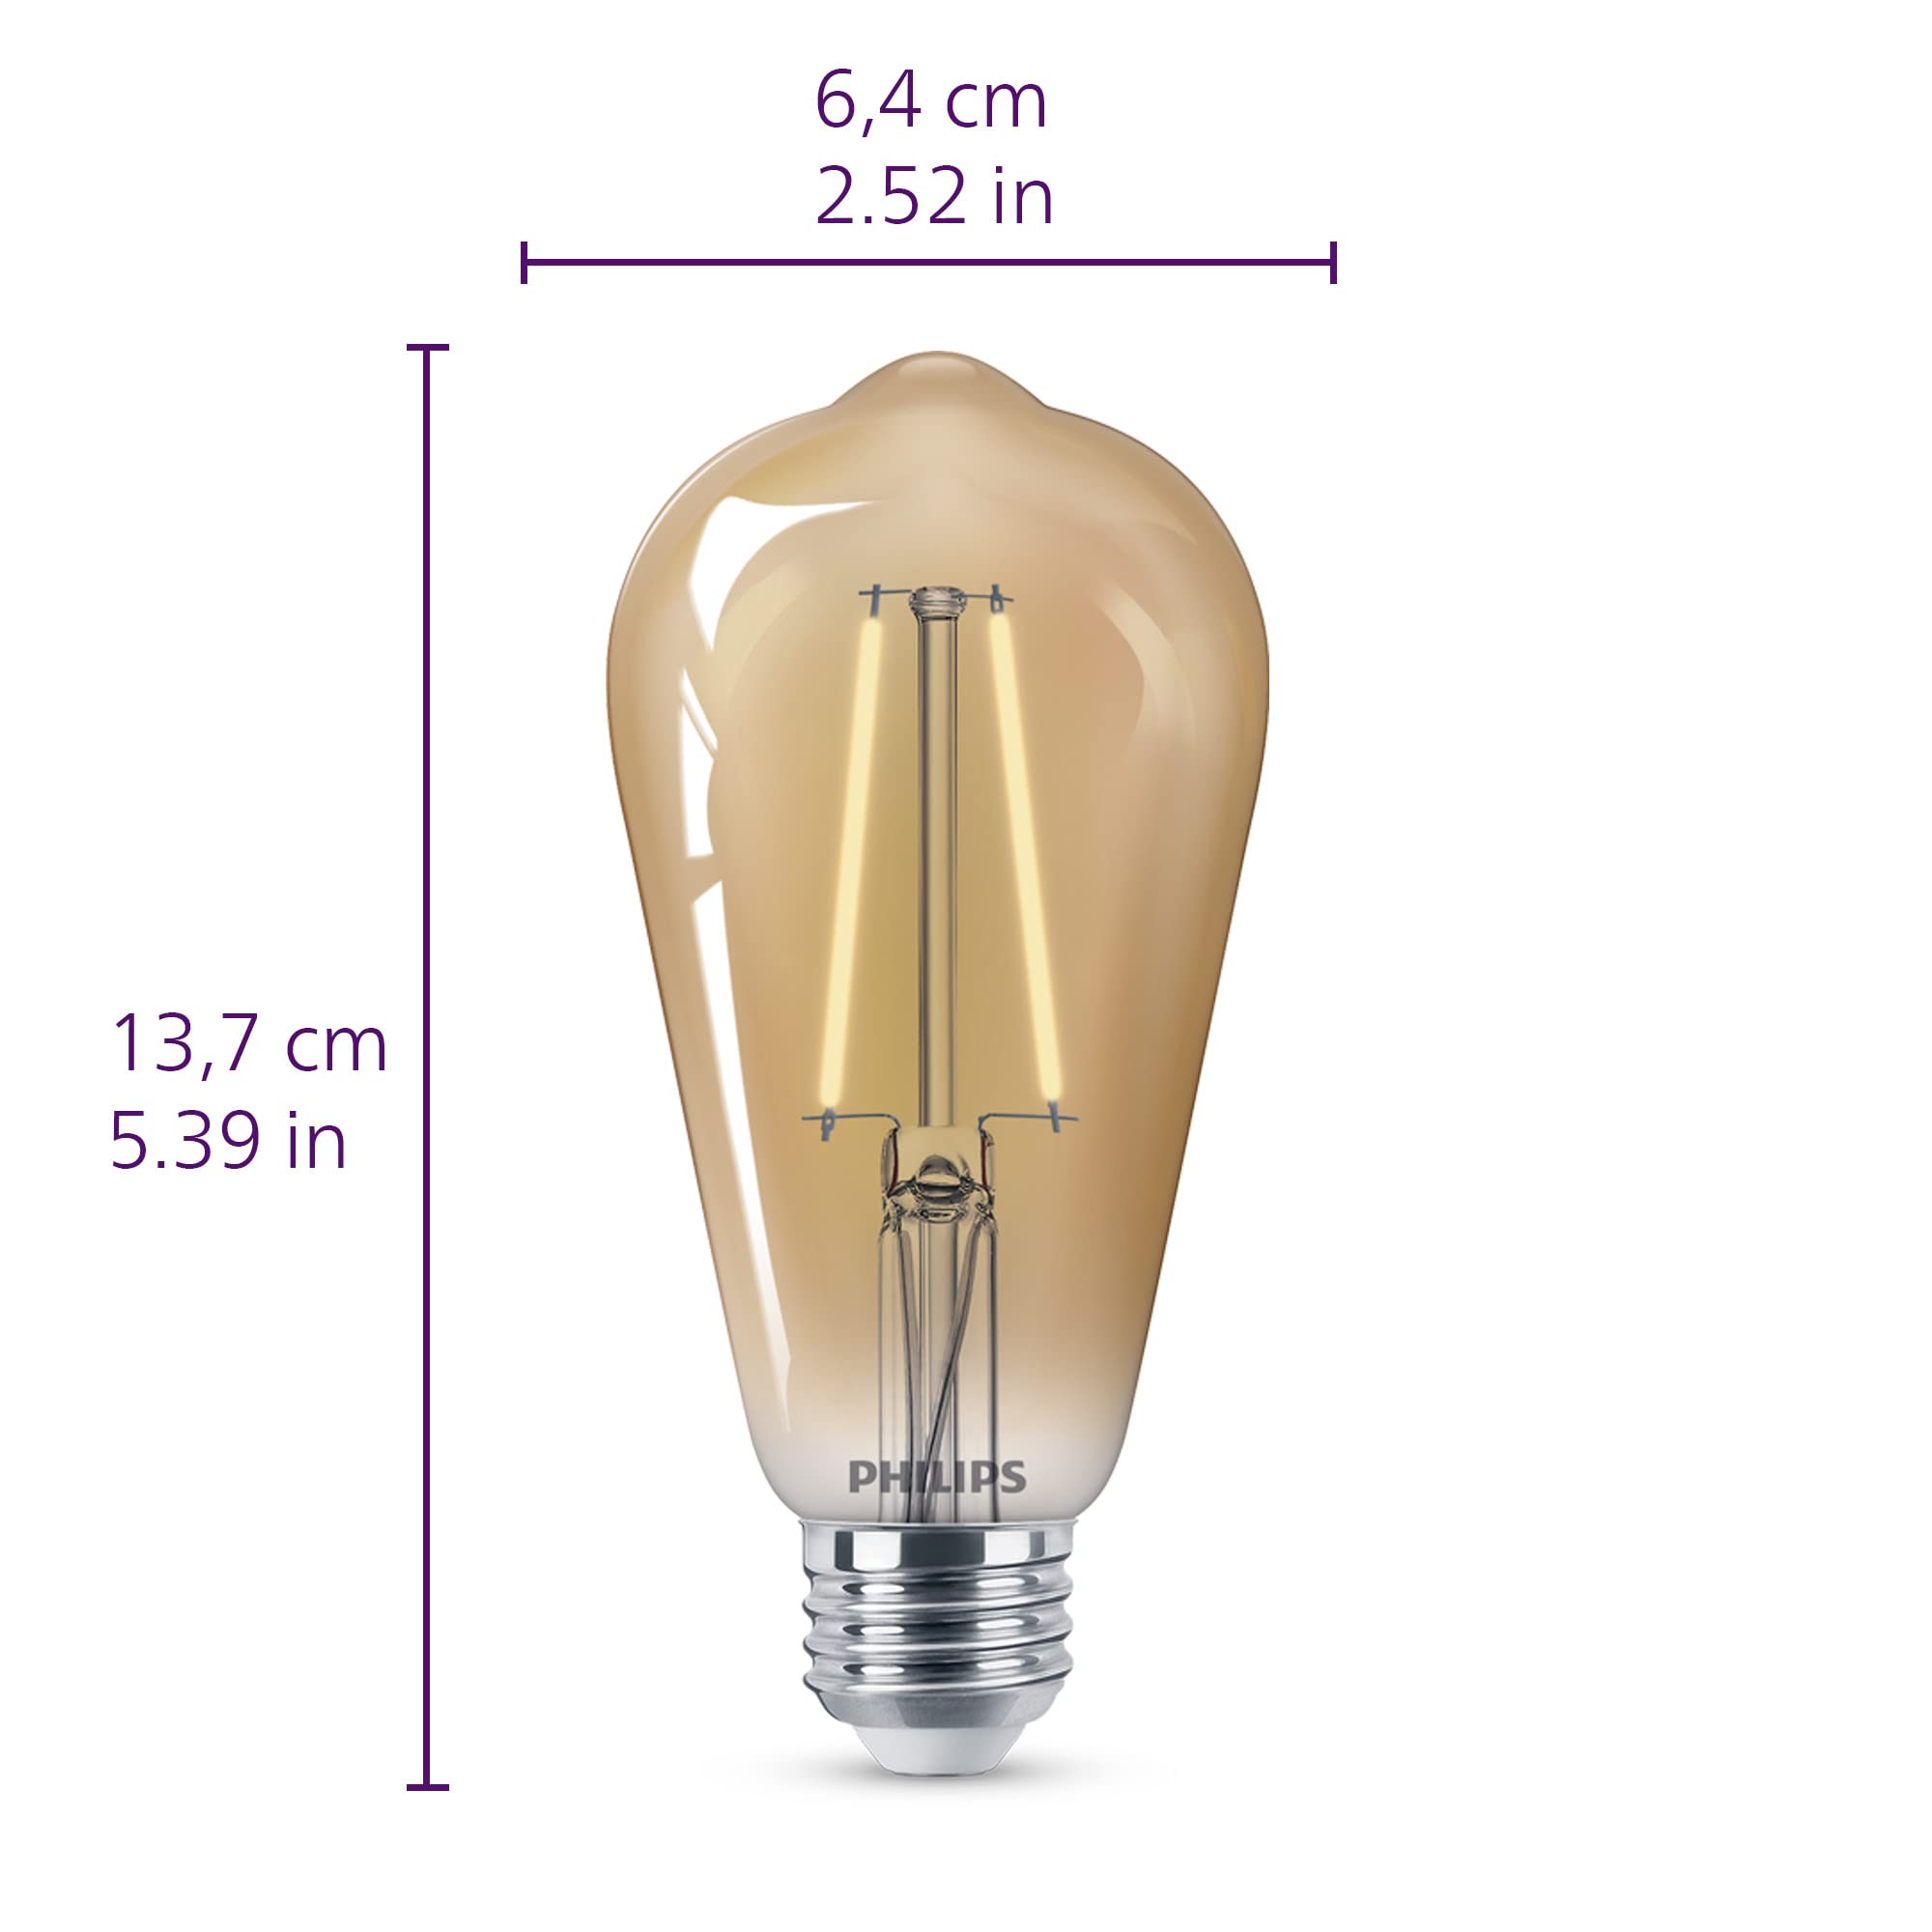 Philips LED Vintage Flicker-Free Amber Spiral ST19, Dimmable, Eye Comfort Technology, 300 Lumen, Amber (2000), 4.4W=40W, Title 20 Certified, E26 Base, 4PK (573963)